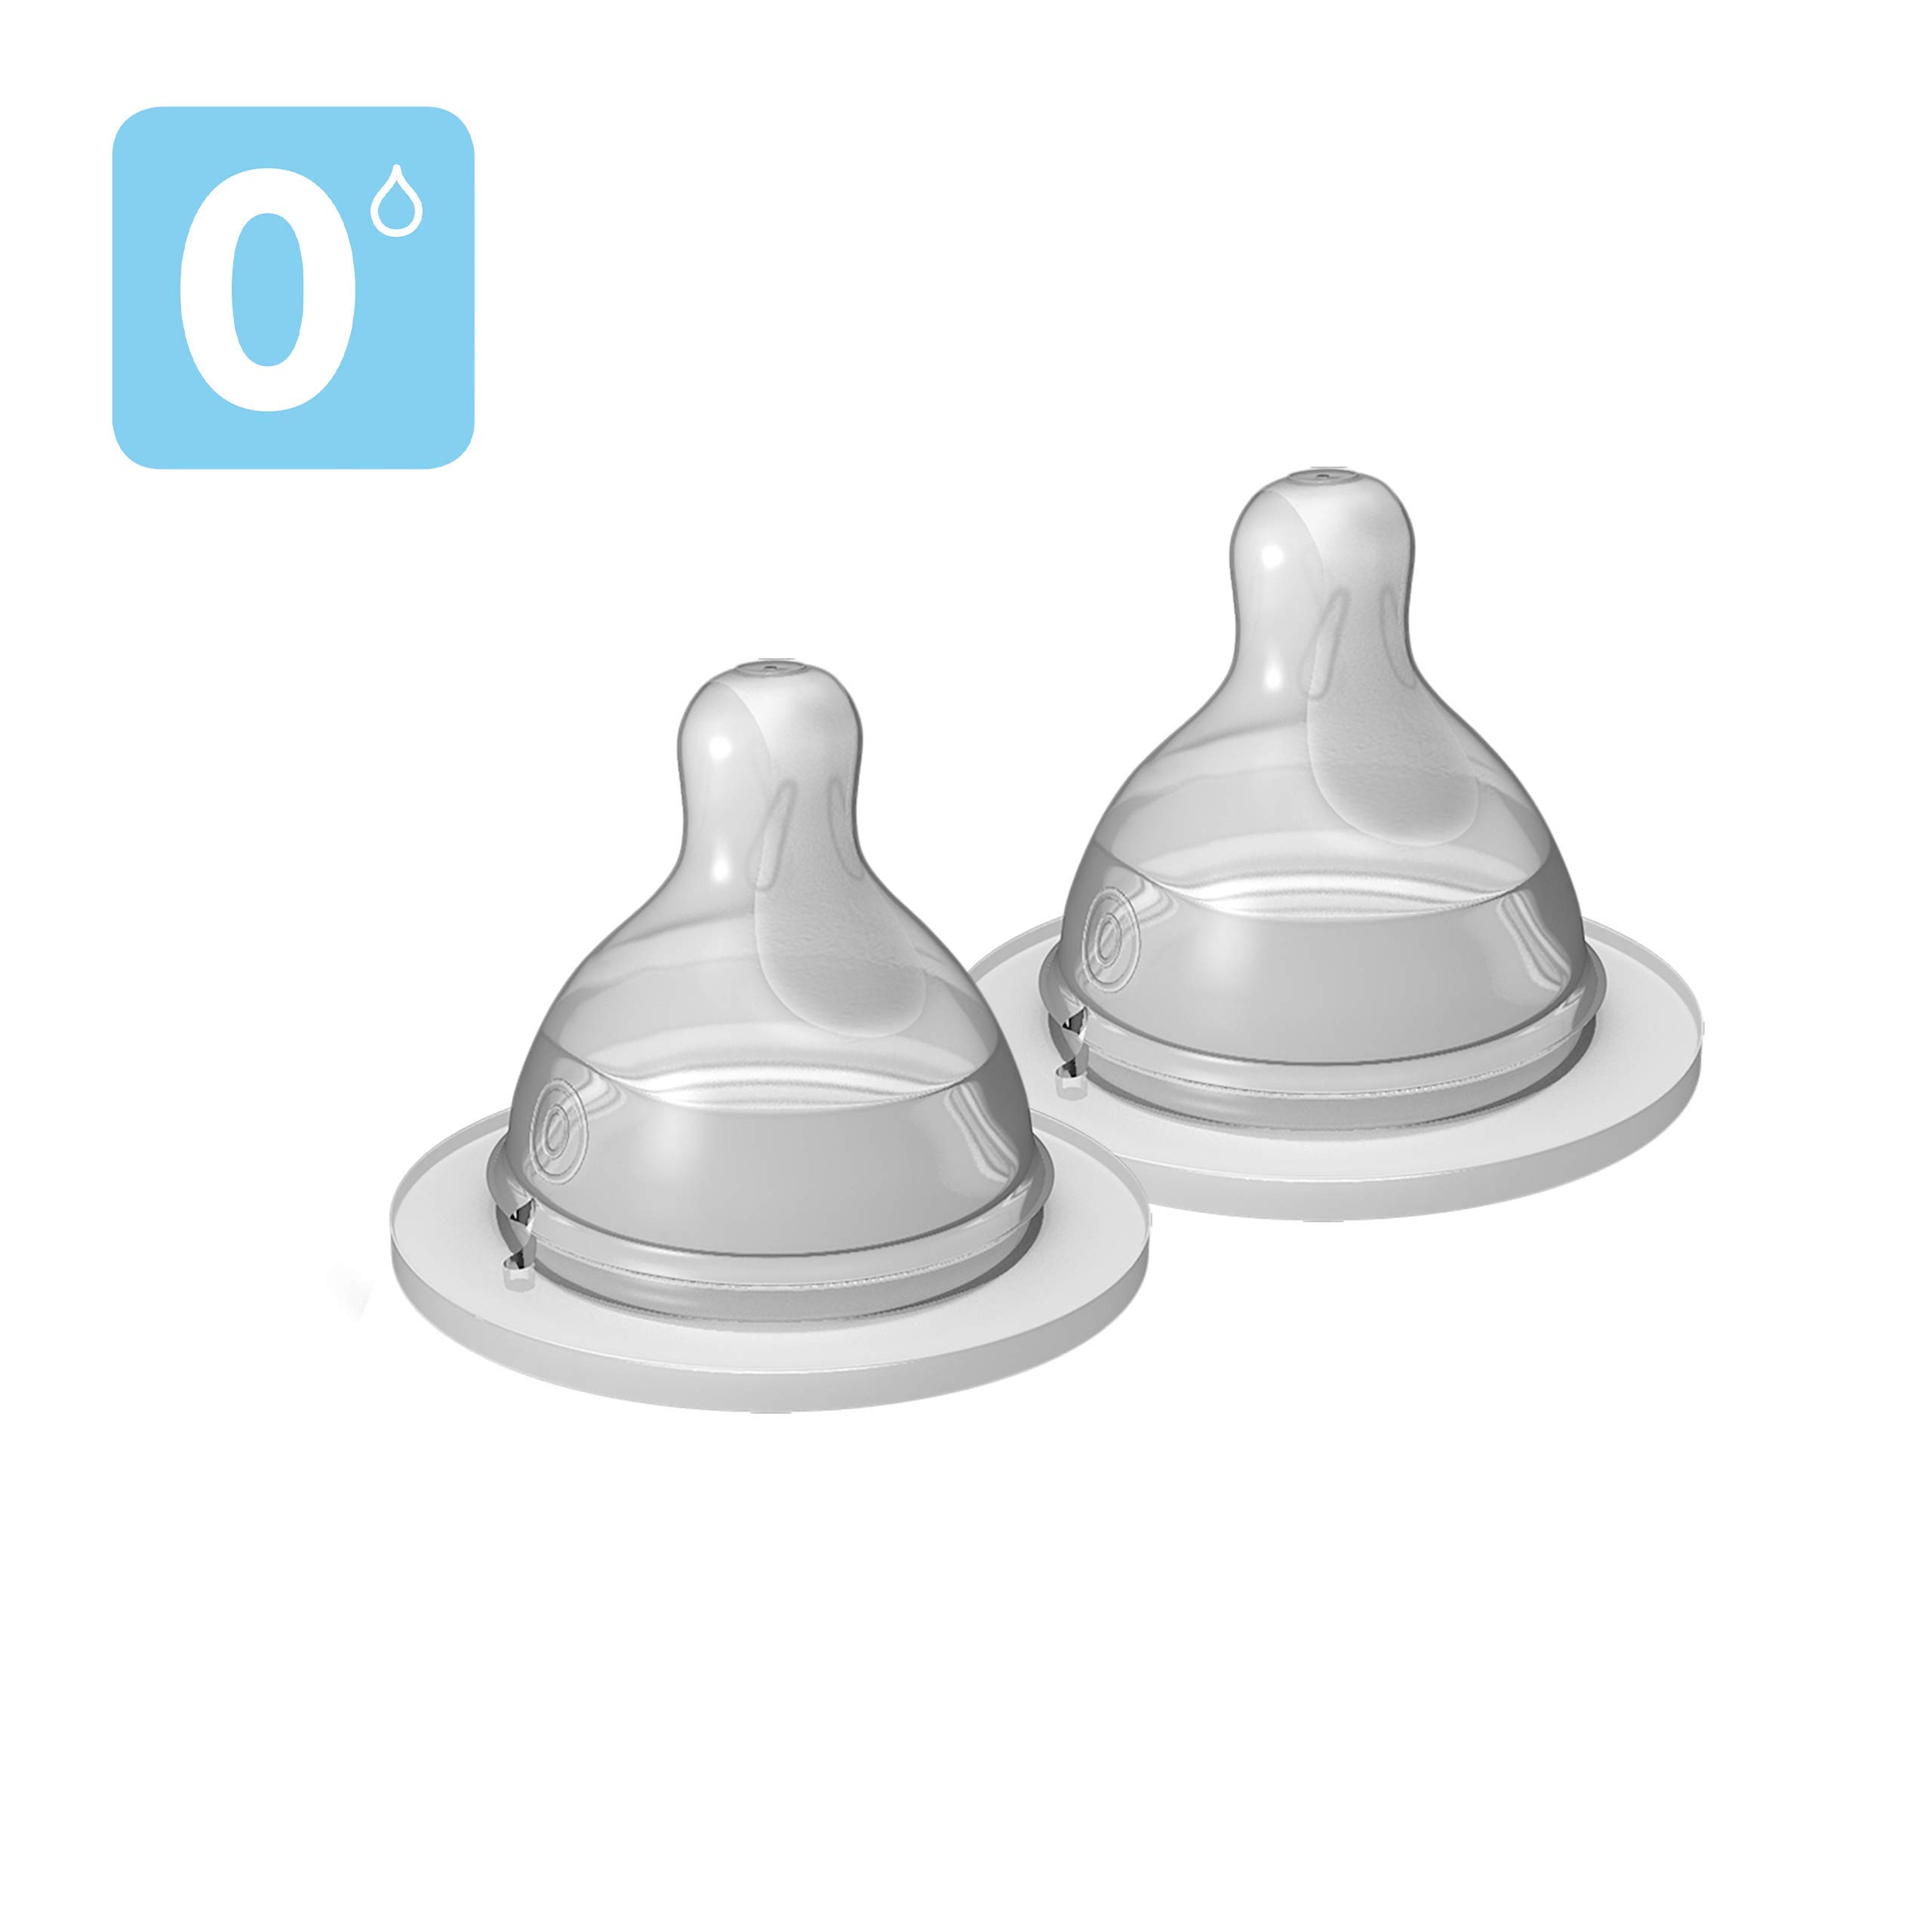 MAM Bottle Nipples Extra Slow Flow Nipple Size 0, for Newborn Babies and Older, SkinSoft Silicone Nipples for Baby Bottles, Fits All MAM Bottles, 2 Pack